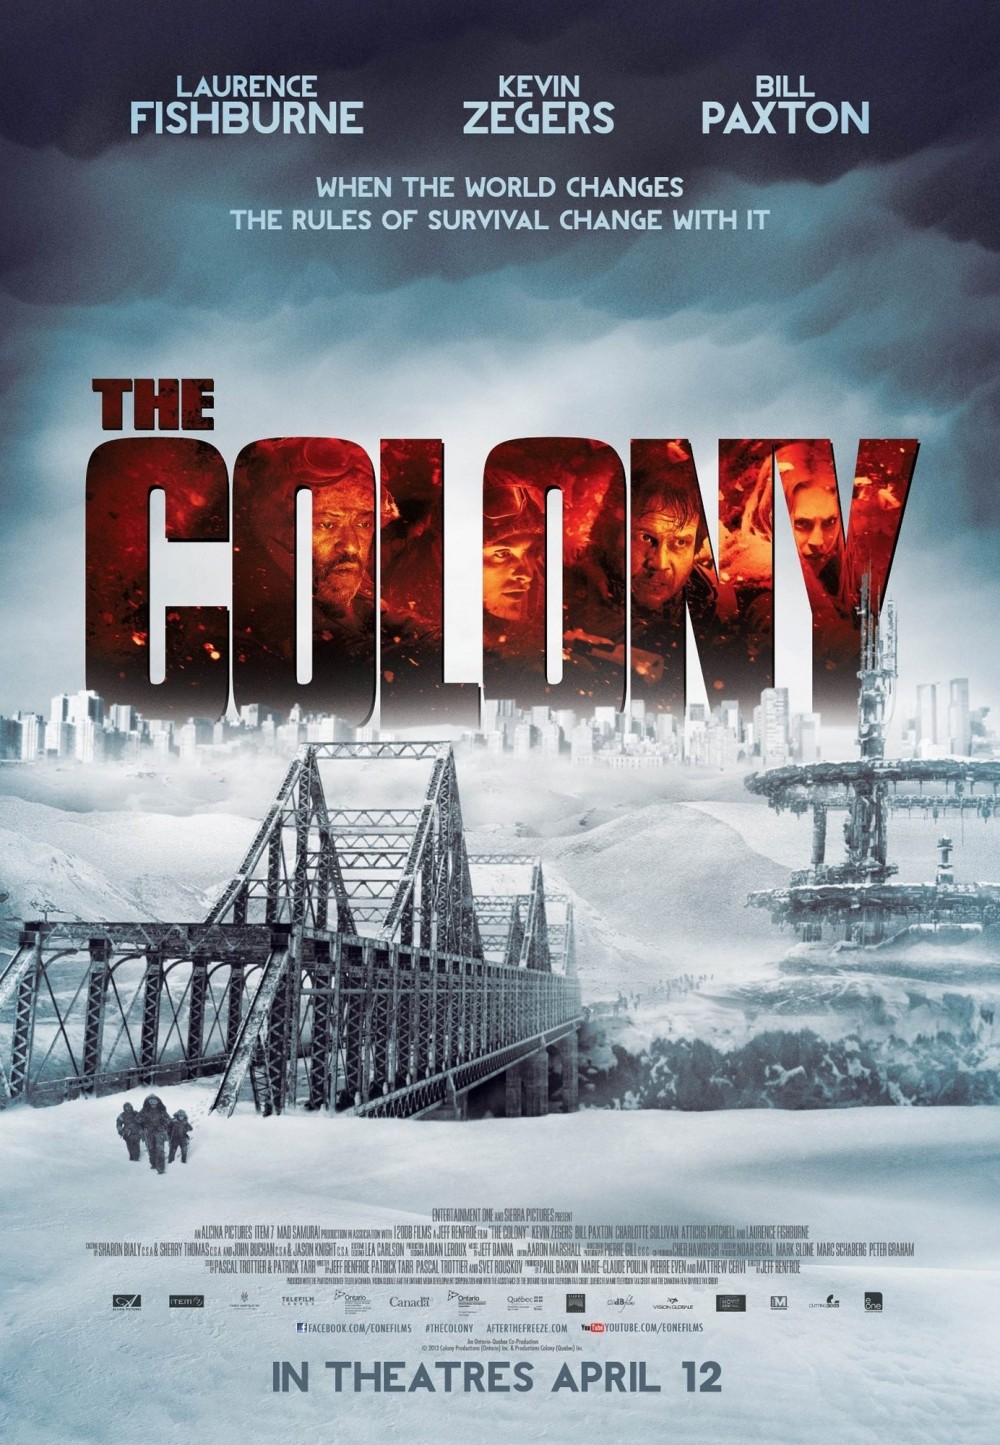 the-colony-poster01.jpg